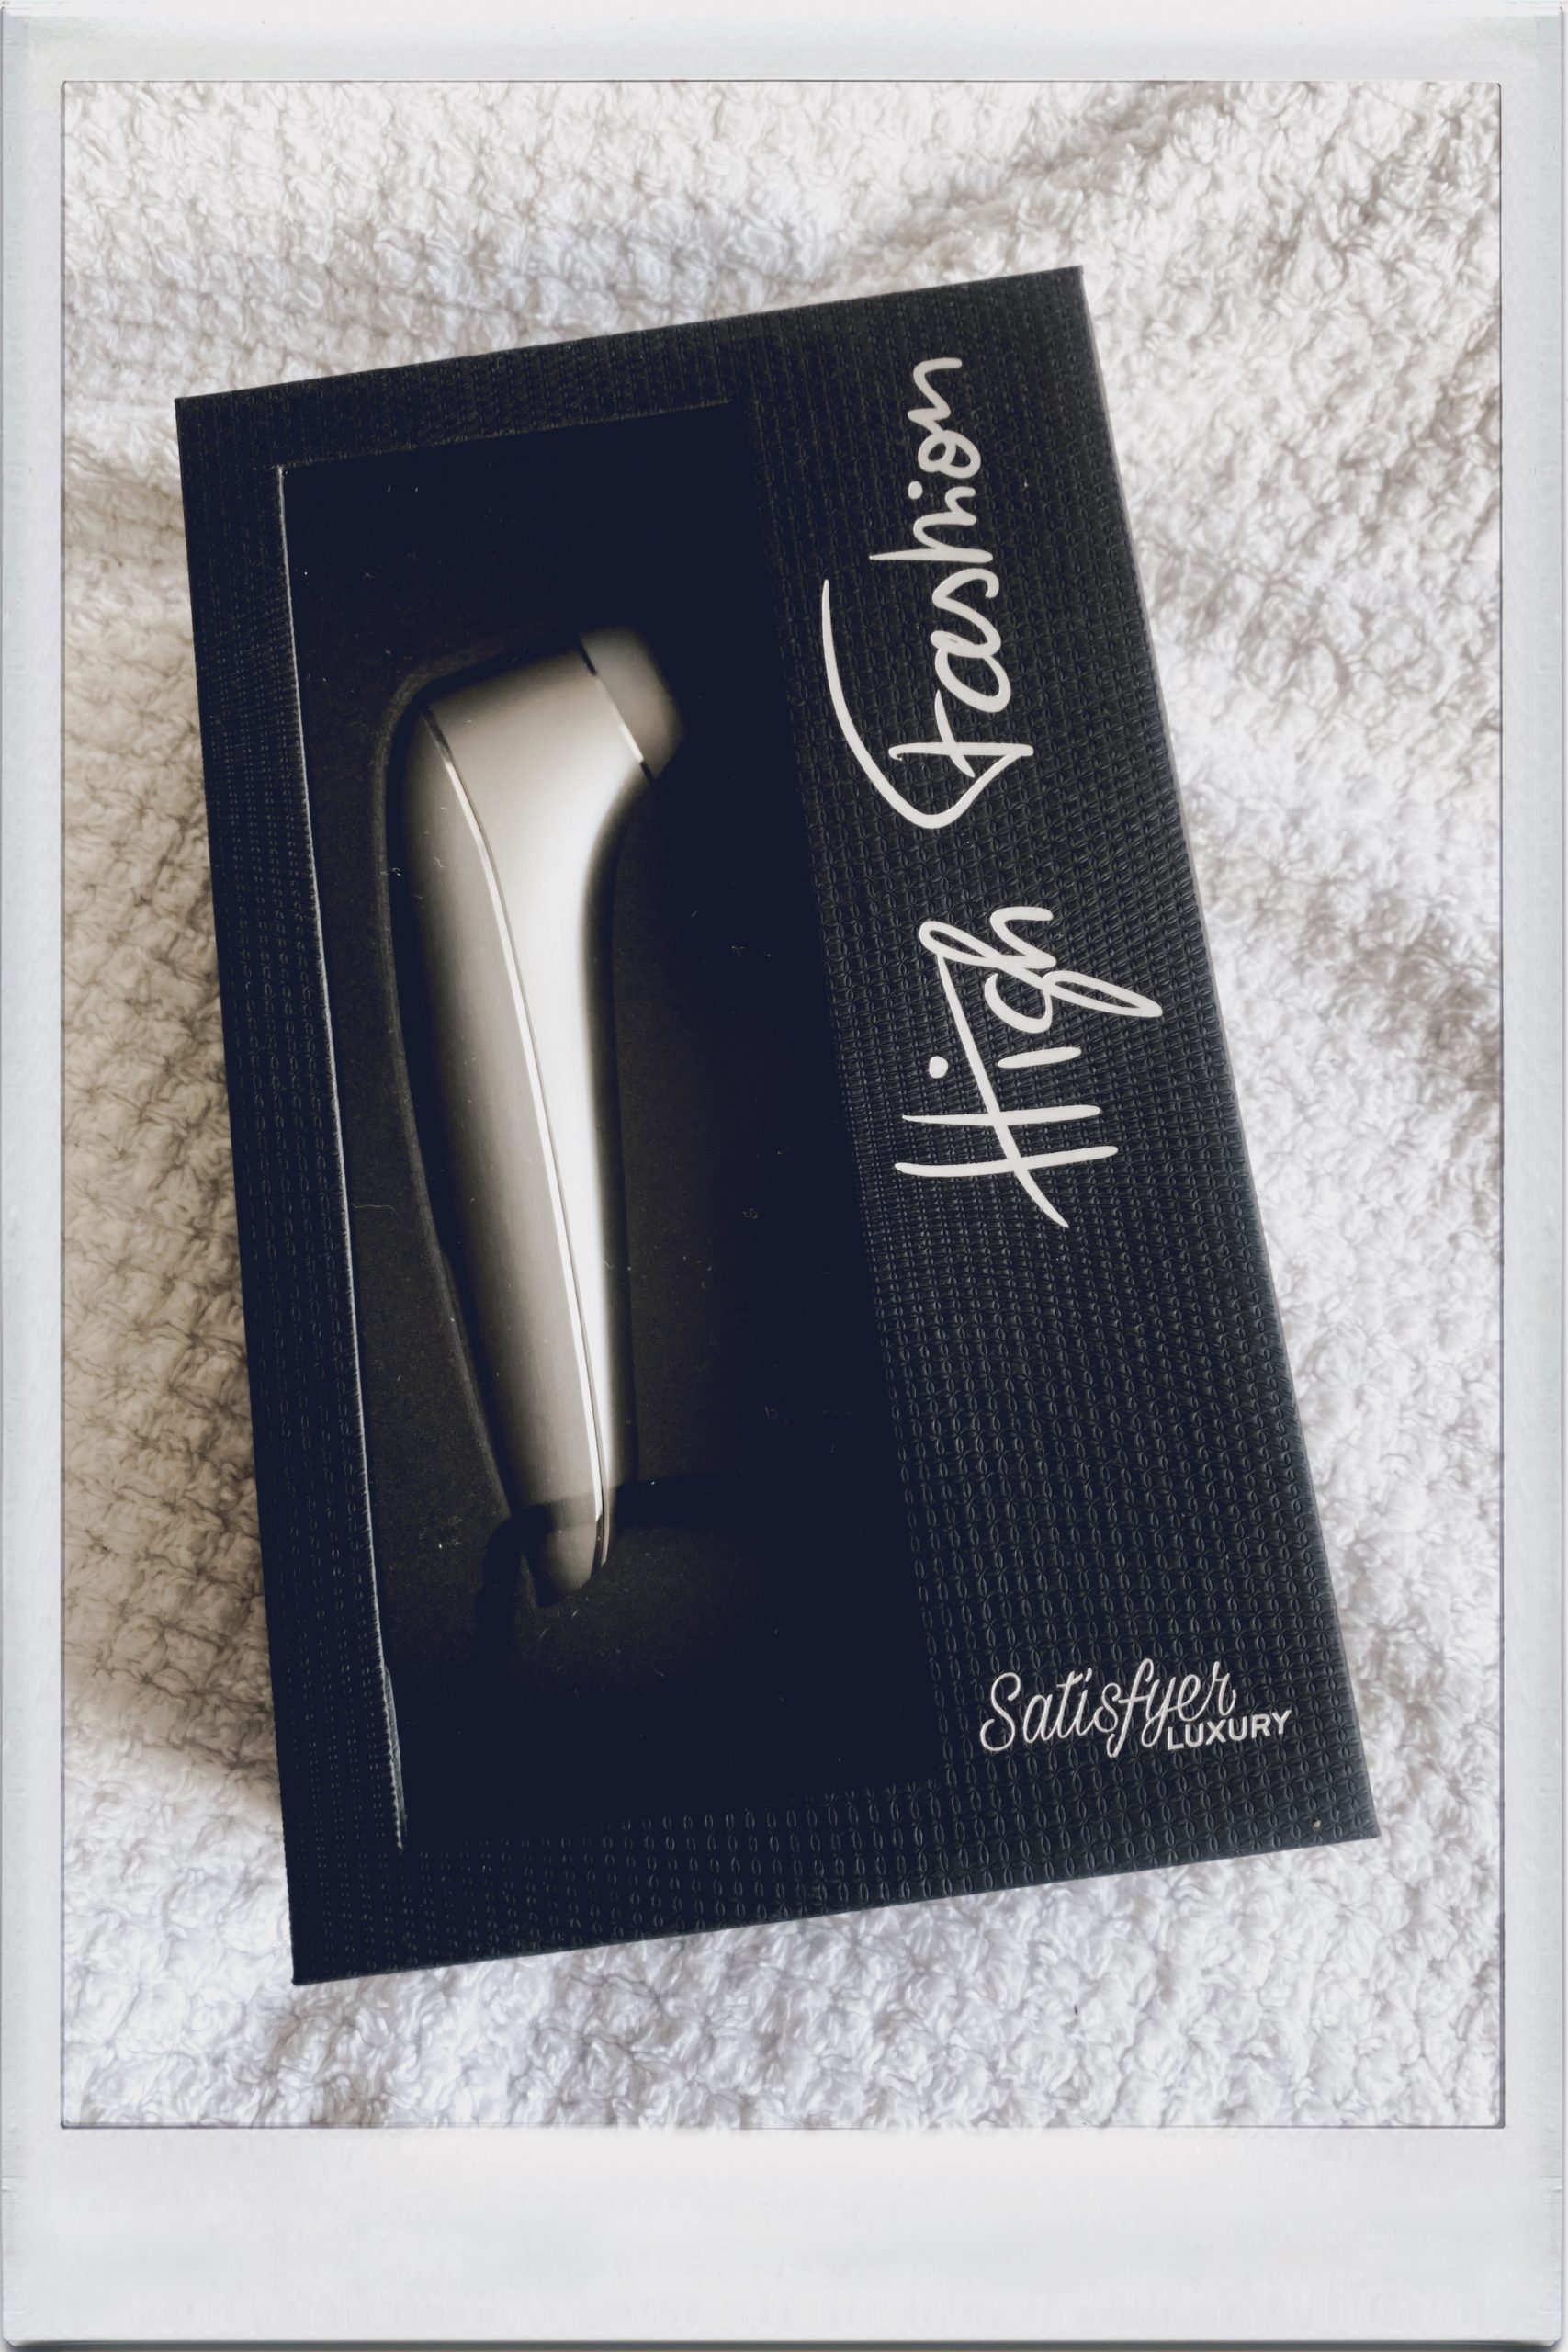 EuphOff prize - the Satisfyer High Fashion